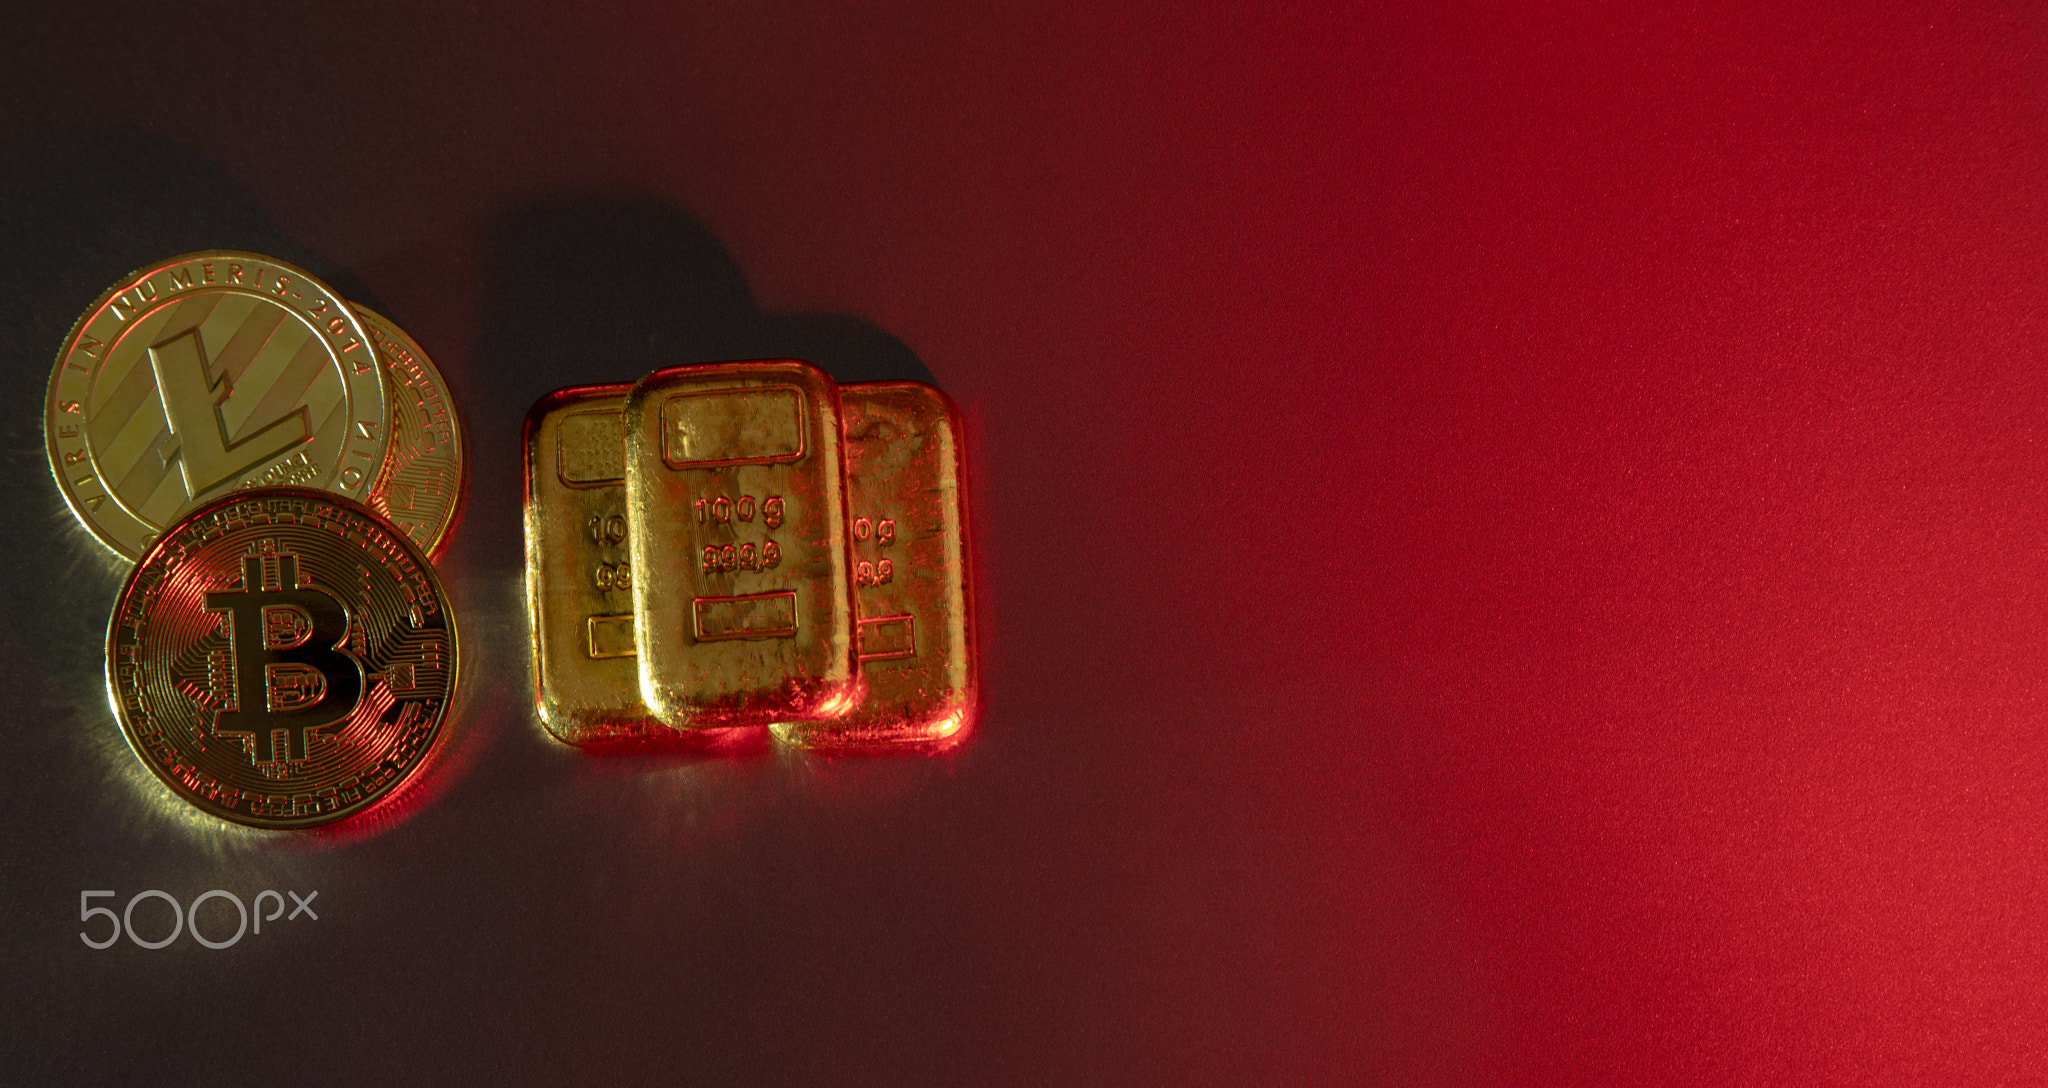 Gold bars and cryptocurrency coins on a red background. Current trends in financial markets.